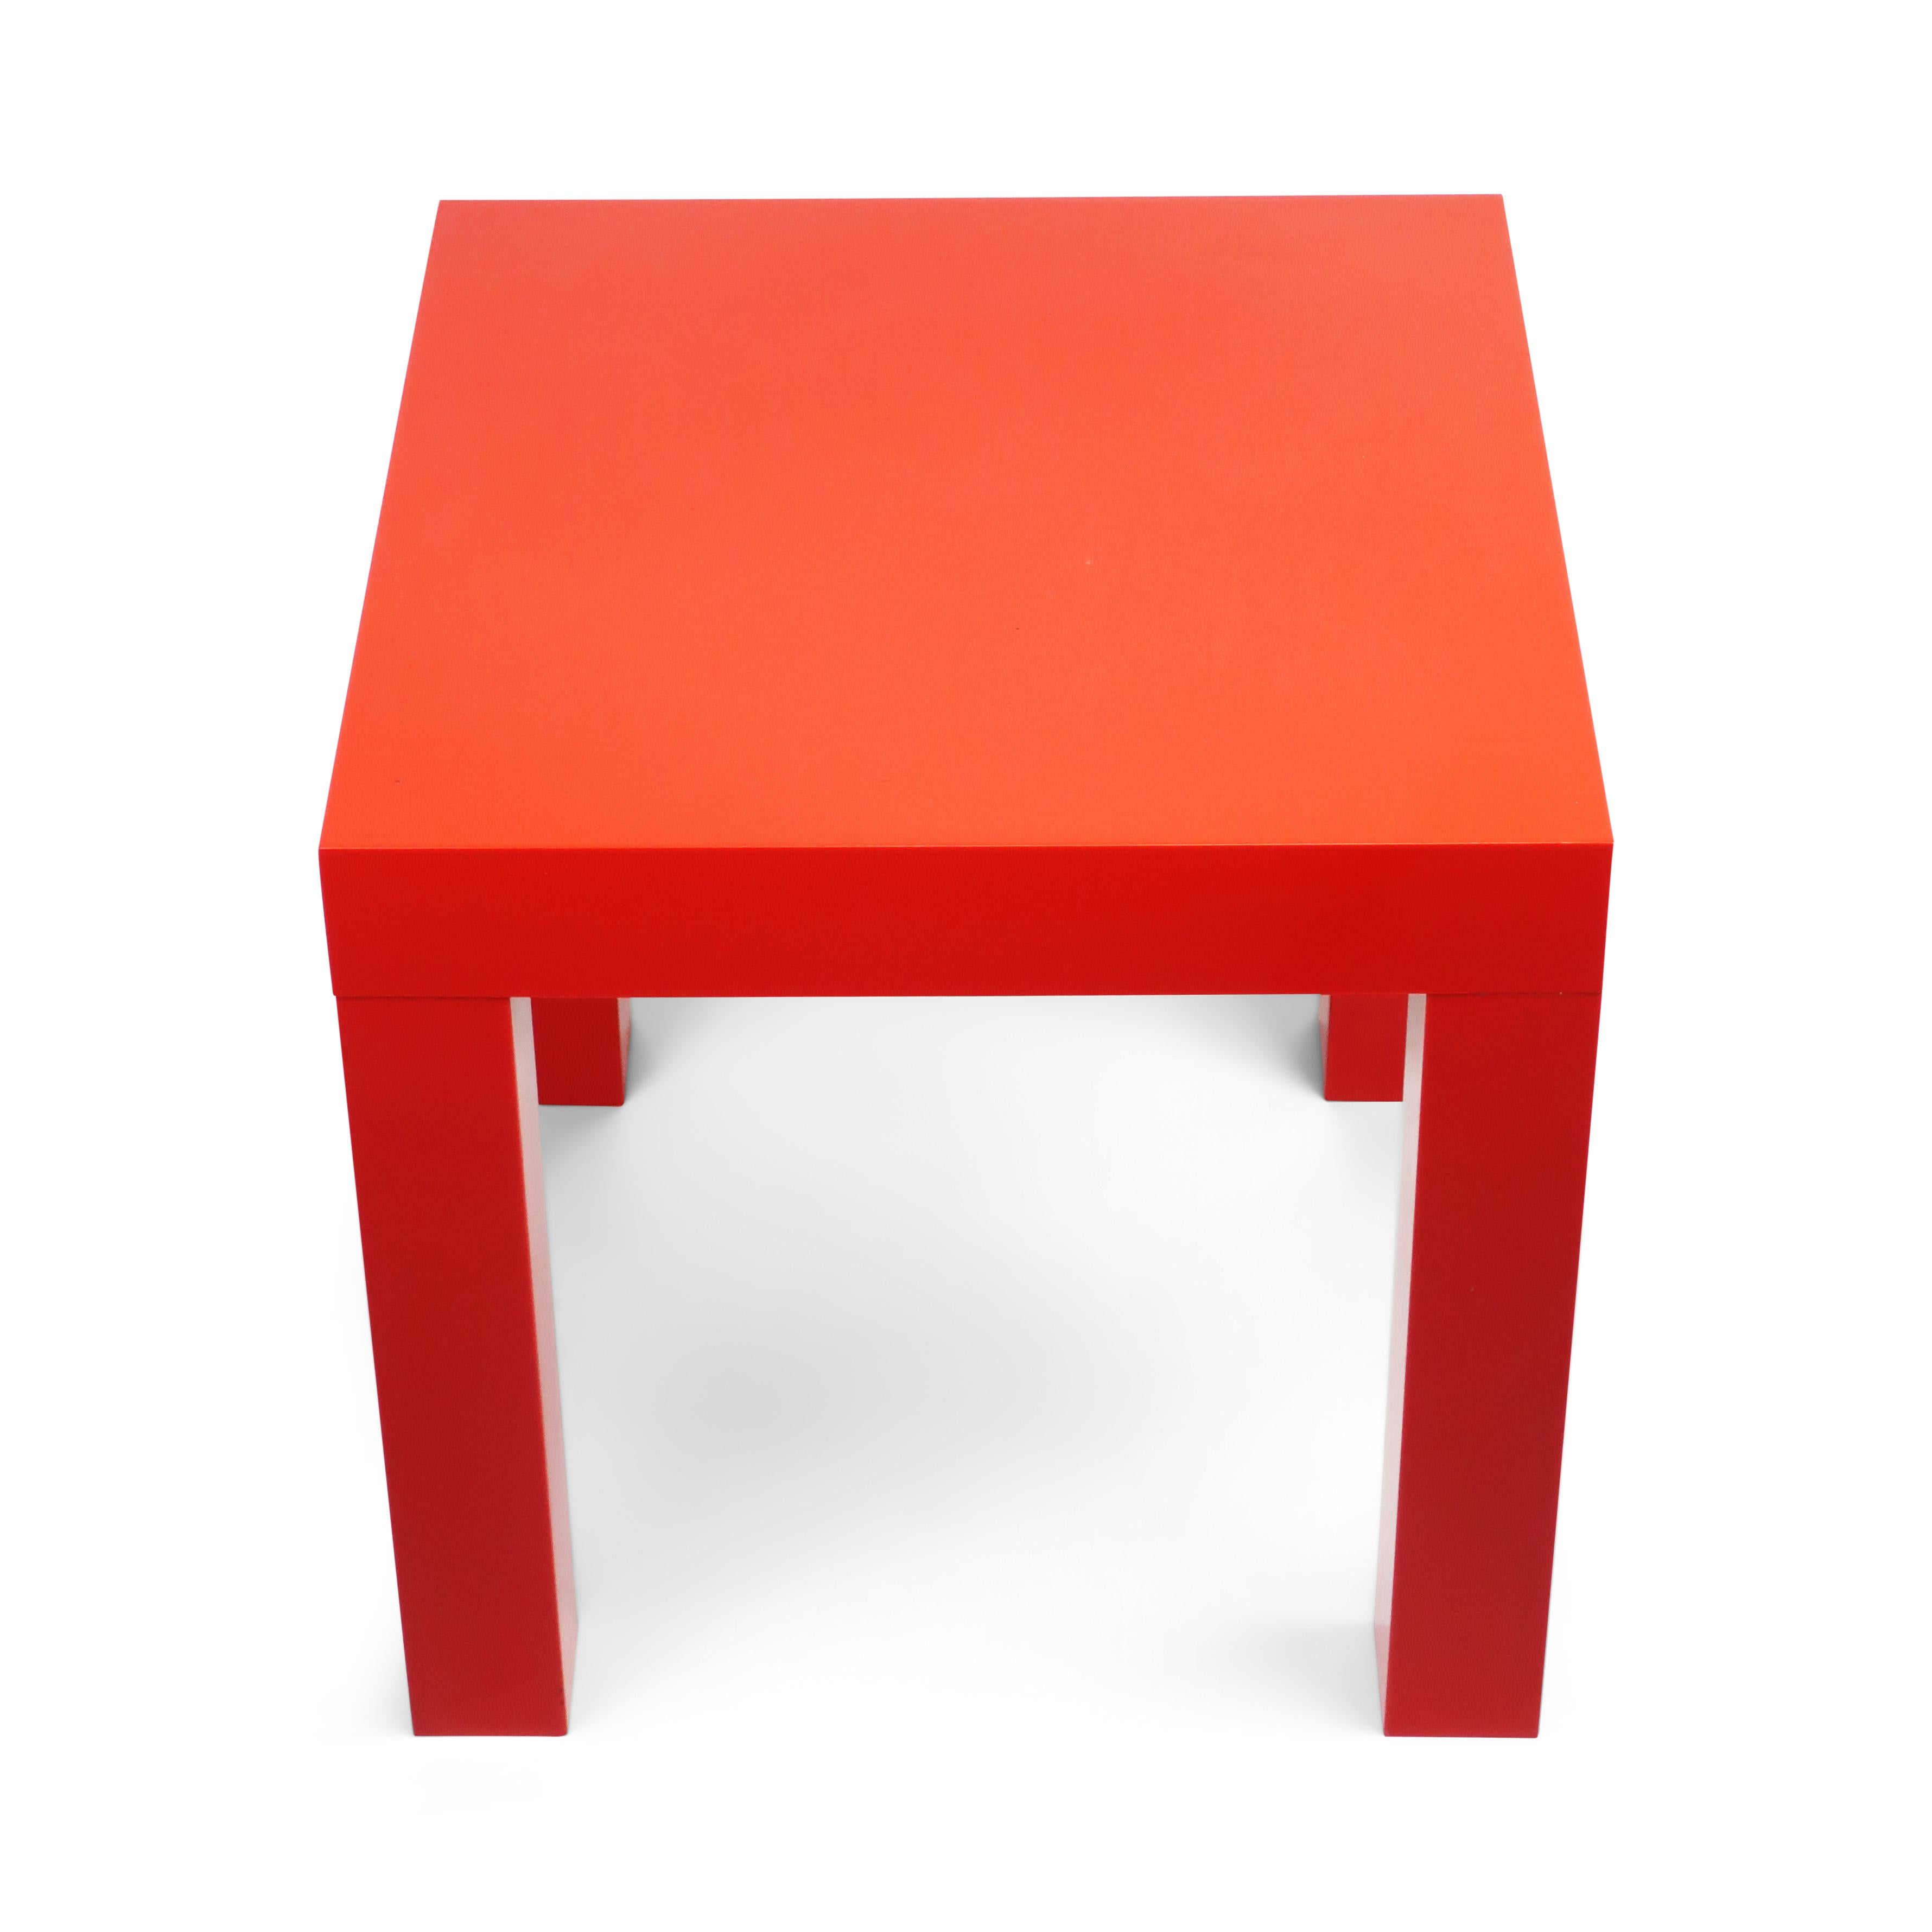 A great red plastic Parson table that’s perfect is so many ways: a perfect cube, a perfect side table for a living room or bedroom, a perfect addition to a child’s room, and a perfect Mid-Century Modern design.

In great vintage condition with